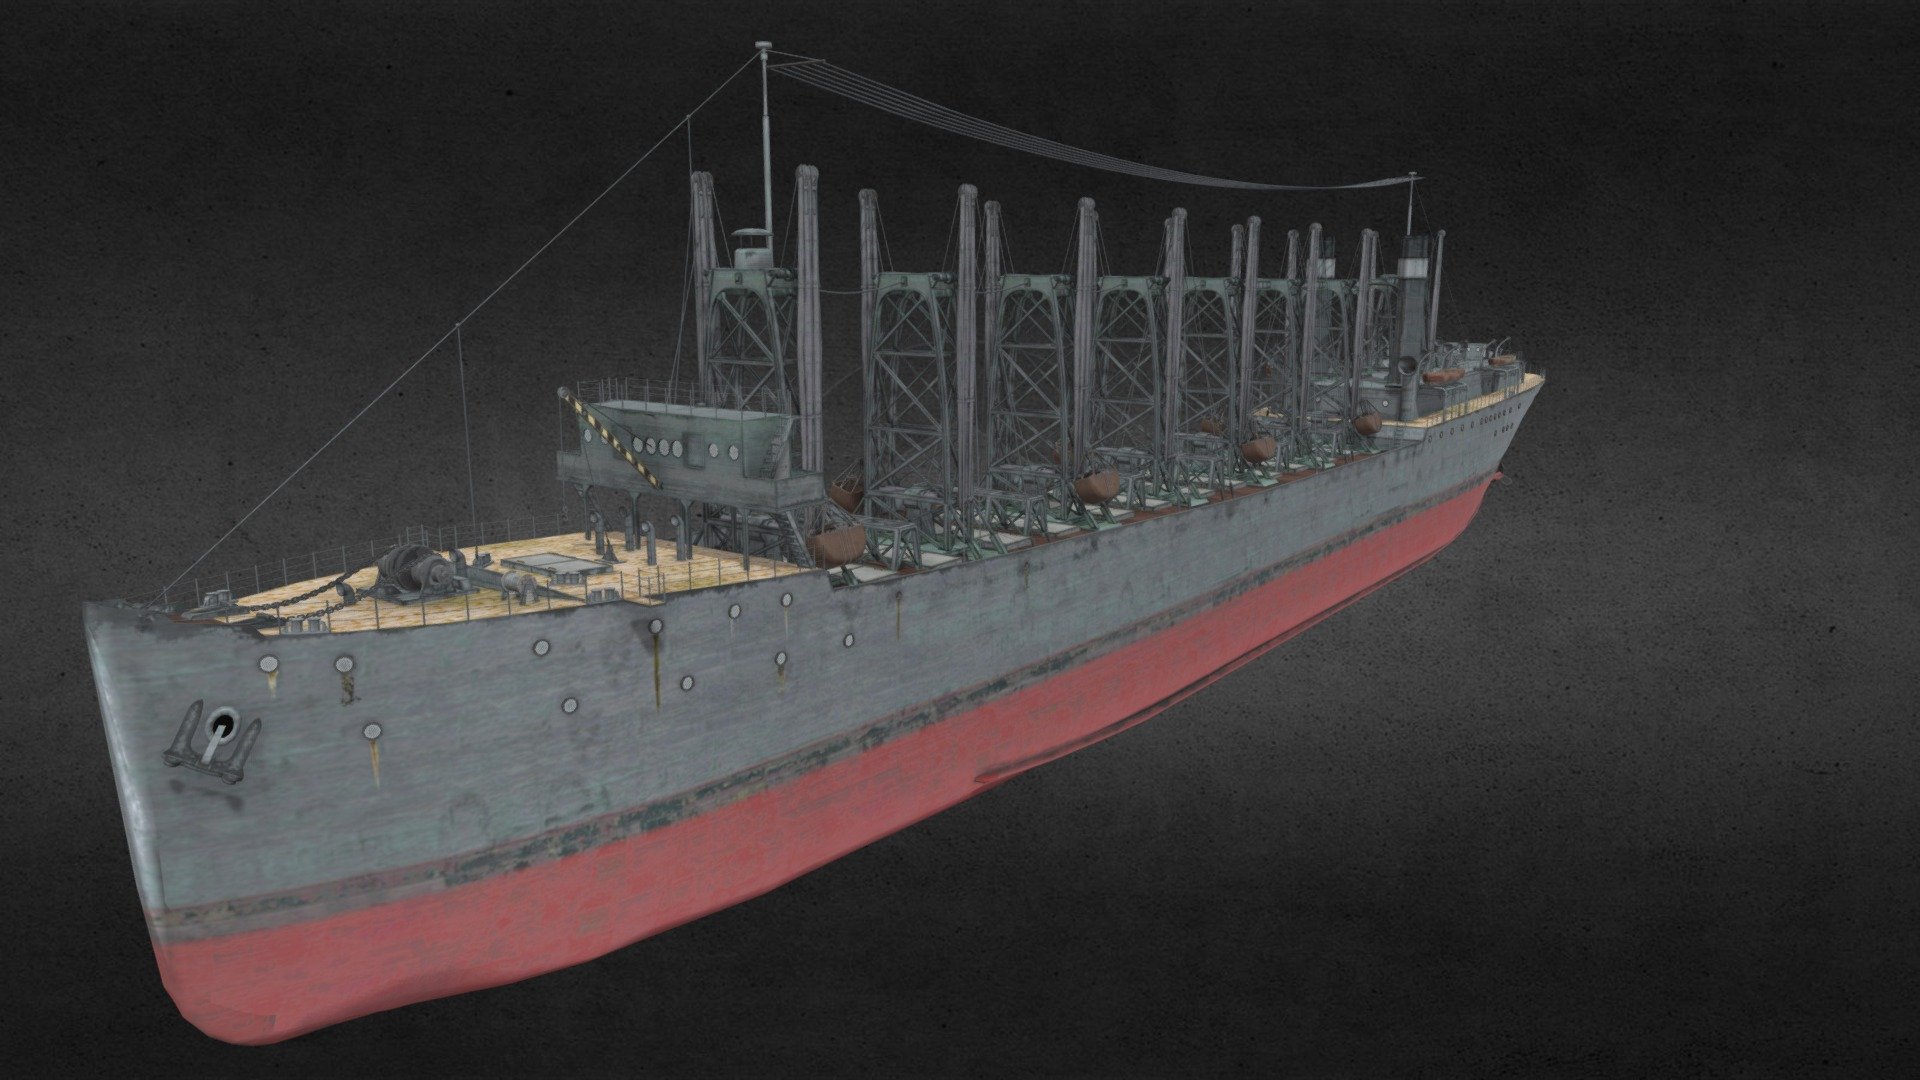 A 1920s american collier originally designed to transport coal and refuel other warships on the sea. Later rebuilt into a first US aircraft carrier know under a name of USS Langley. For those who want to learn more: https://en.wikipedia.org/wiki/USS_Langley_(CV-1) . 

All textures are 4k including diffuse, metallic, roughness and normal. Full size textures can be found under additional files 3d model